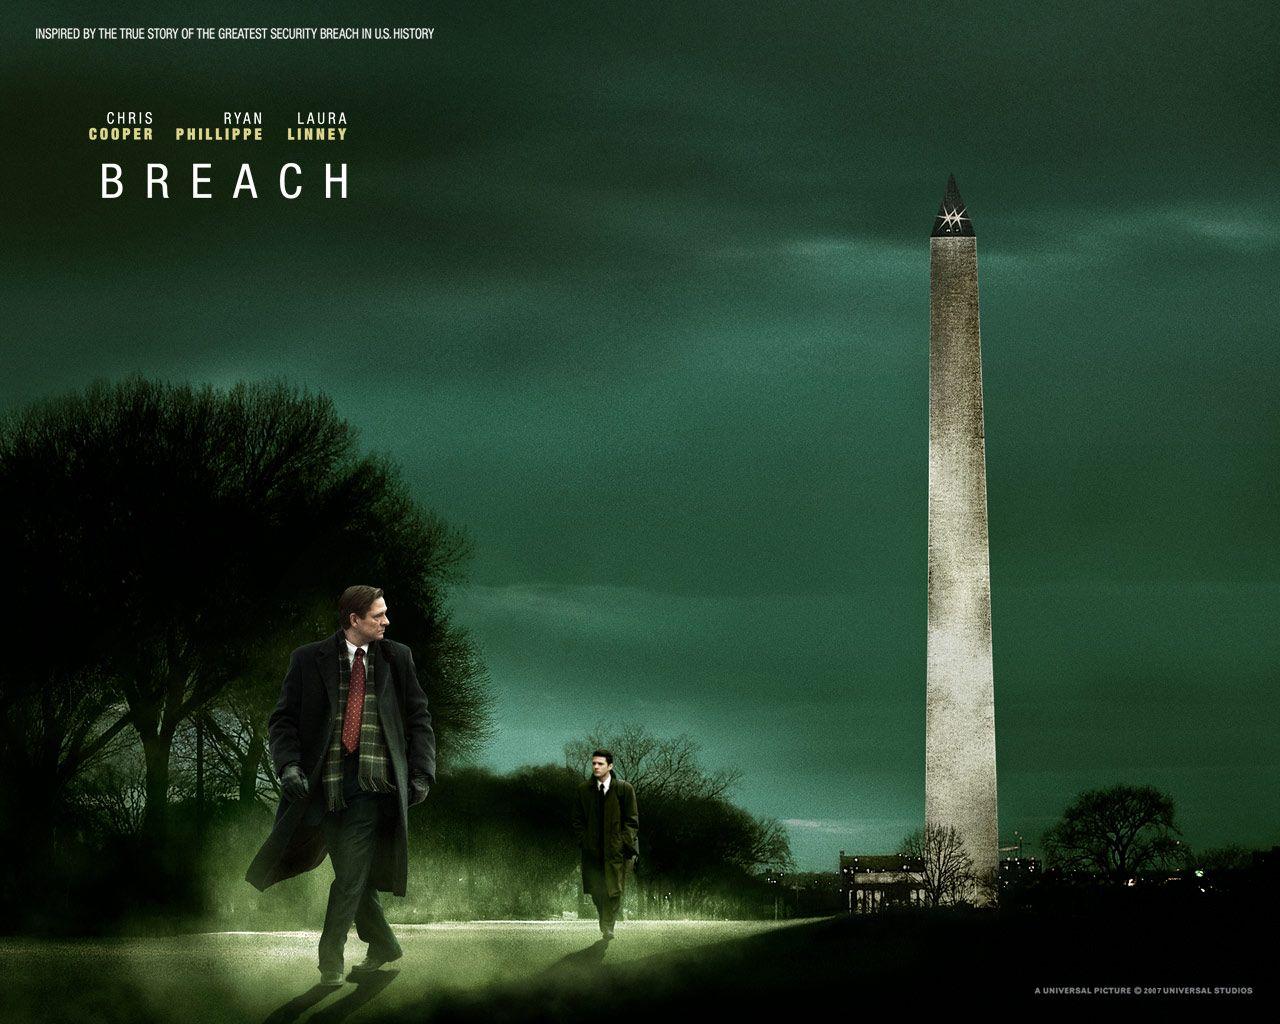 in to the breach download